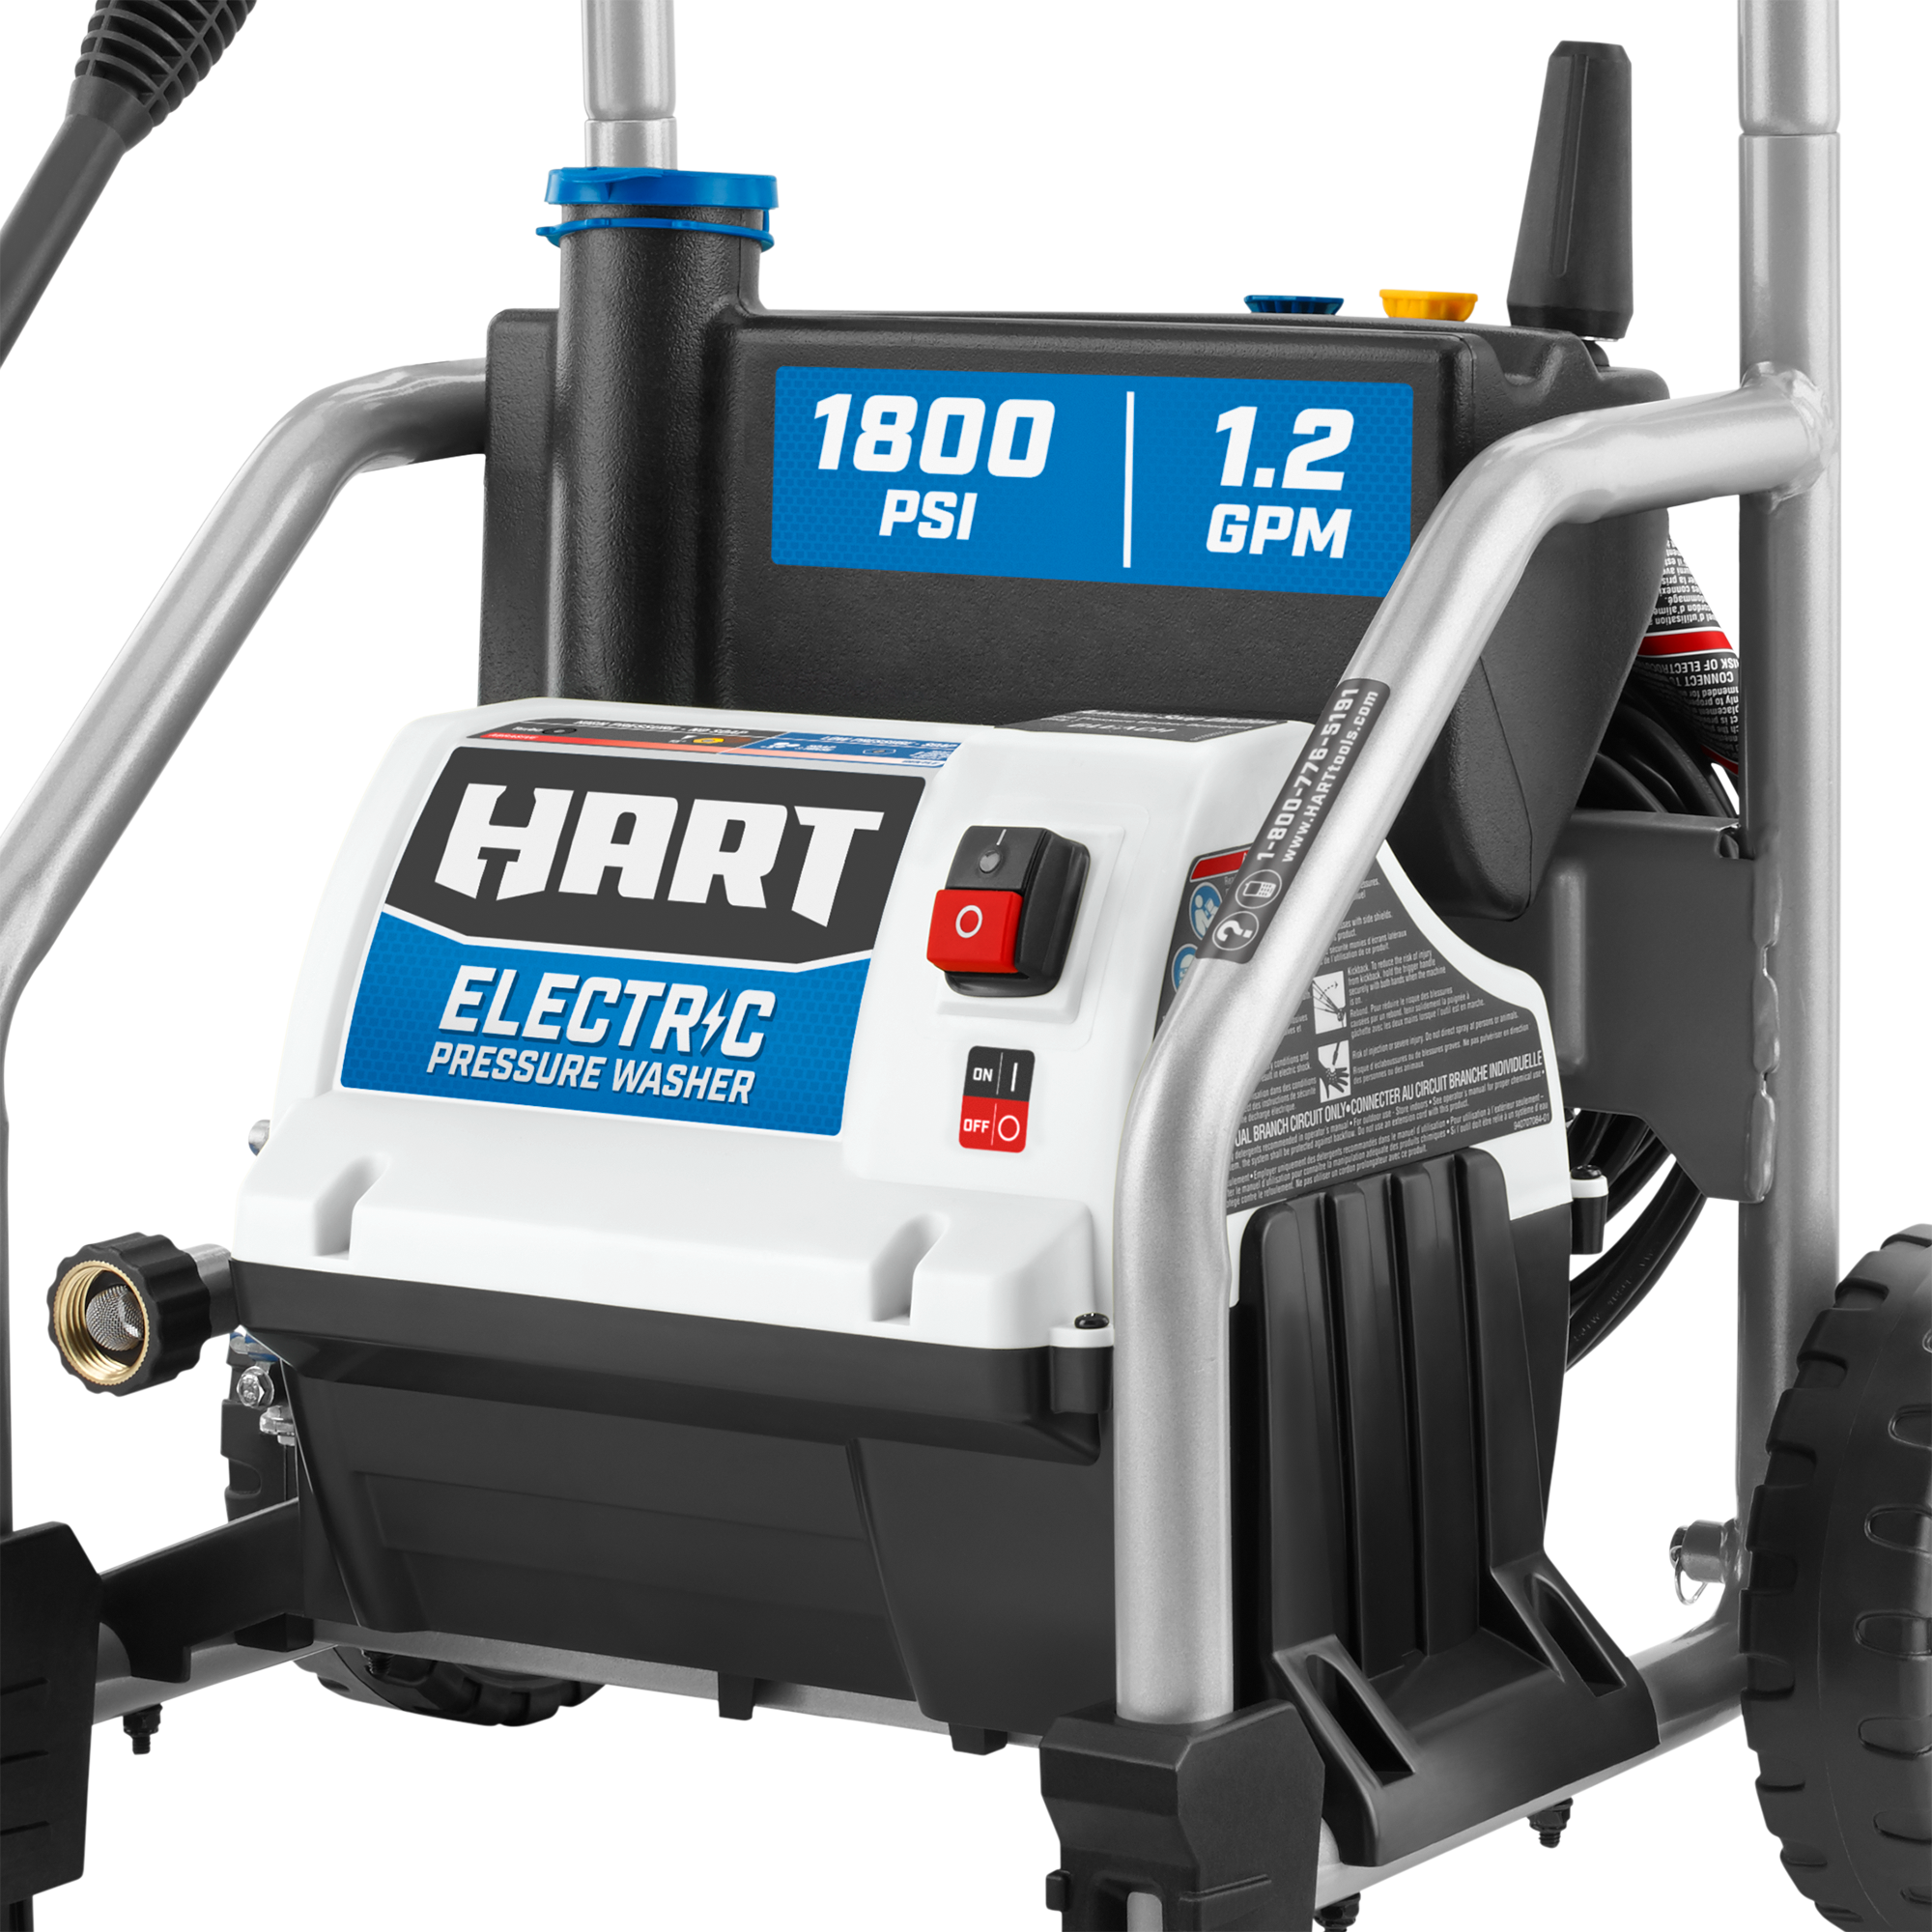 HART 1800 PSI at 1.2 GPM Electric Pressure Washer - image 4 of 10